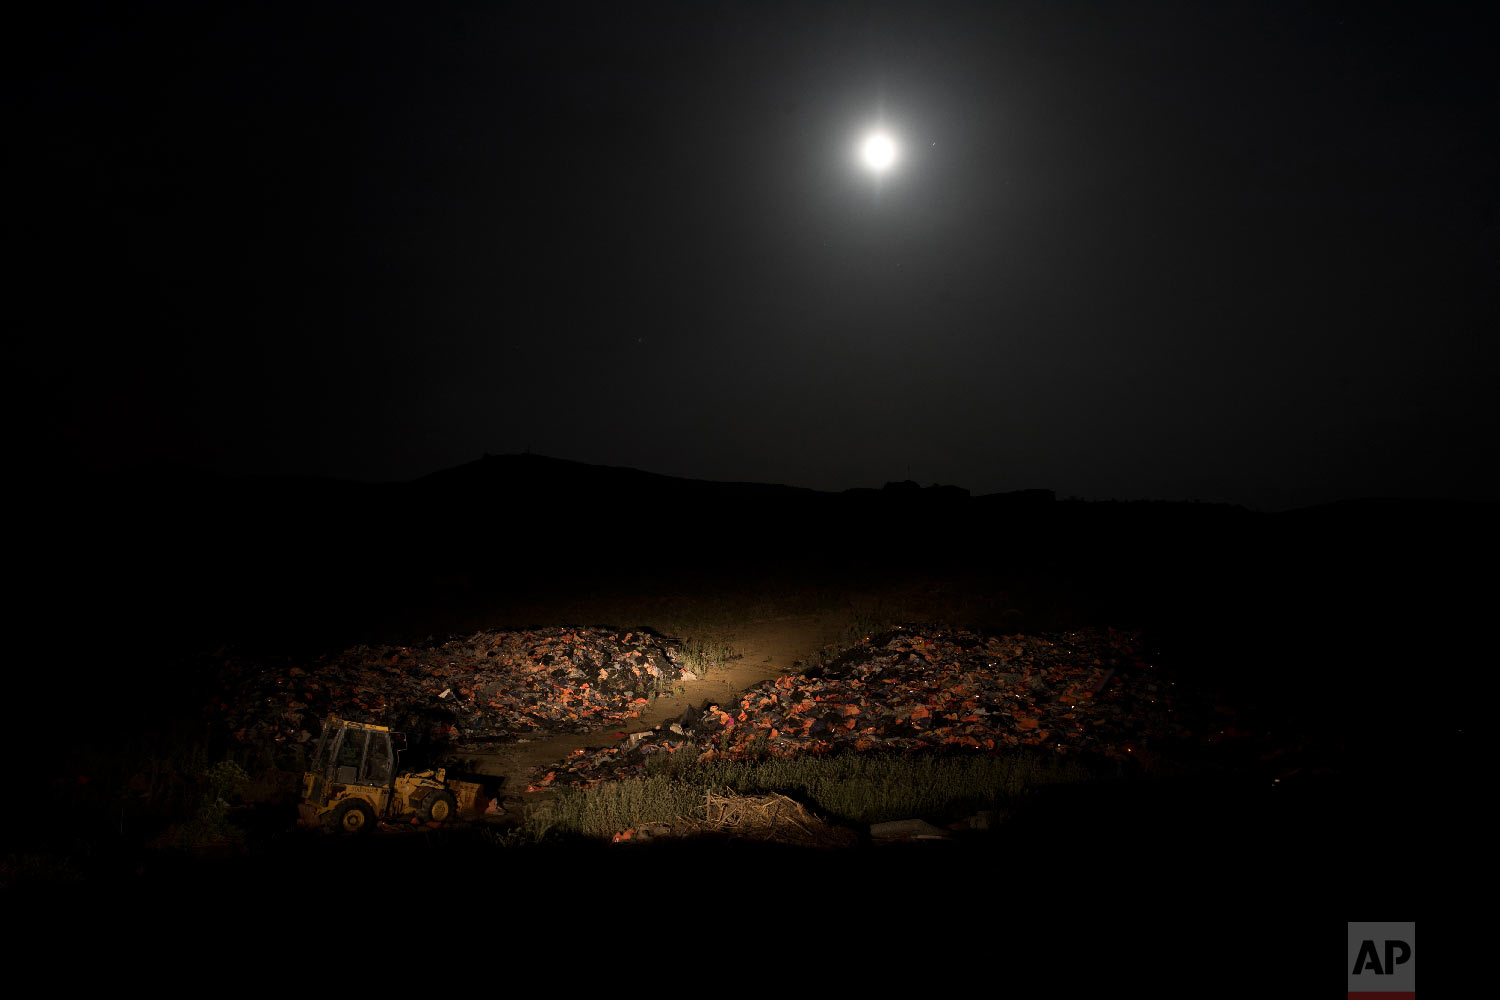  The moon rises above a huge pile of discarded life vests and dinghies used by migrants and refugees crossing from the nearby Turkish coast, at a dump on the island of Lesbos on May 5, 2018. (AP Photo/Petros Giannakouris) 